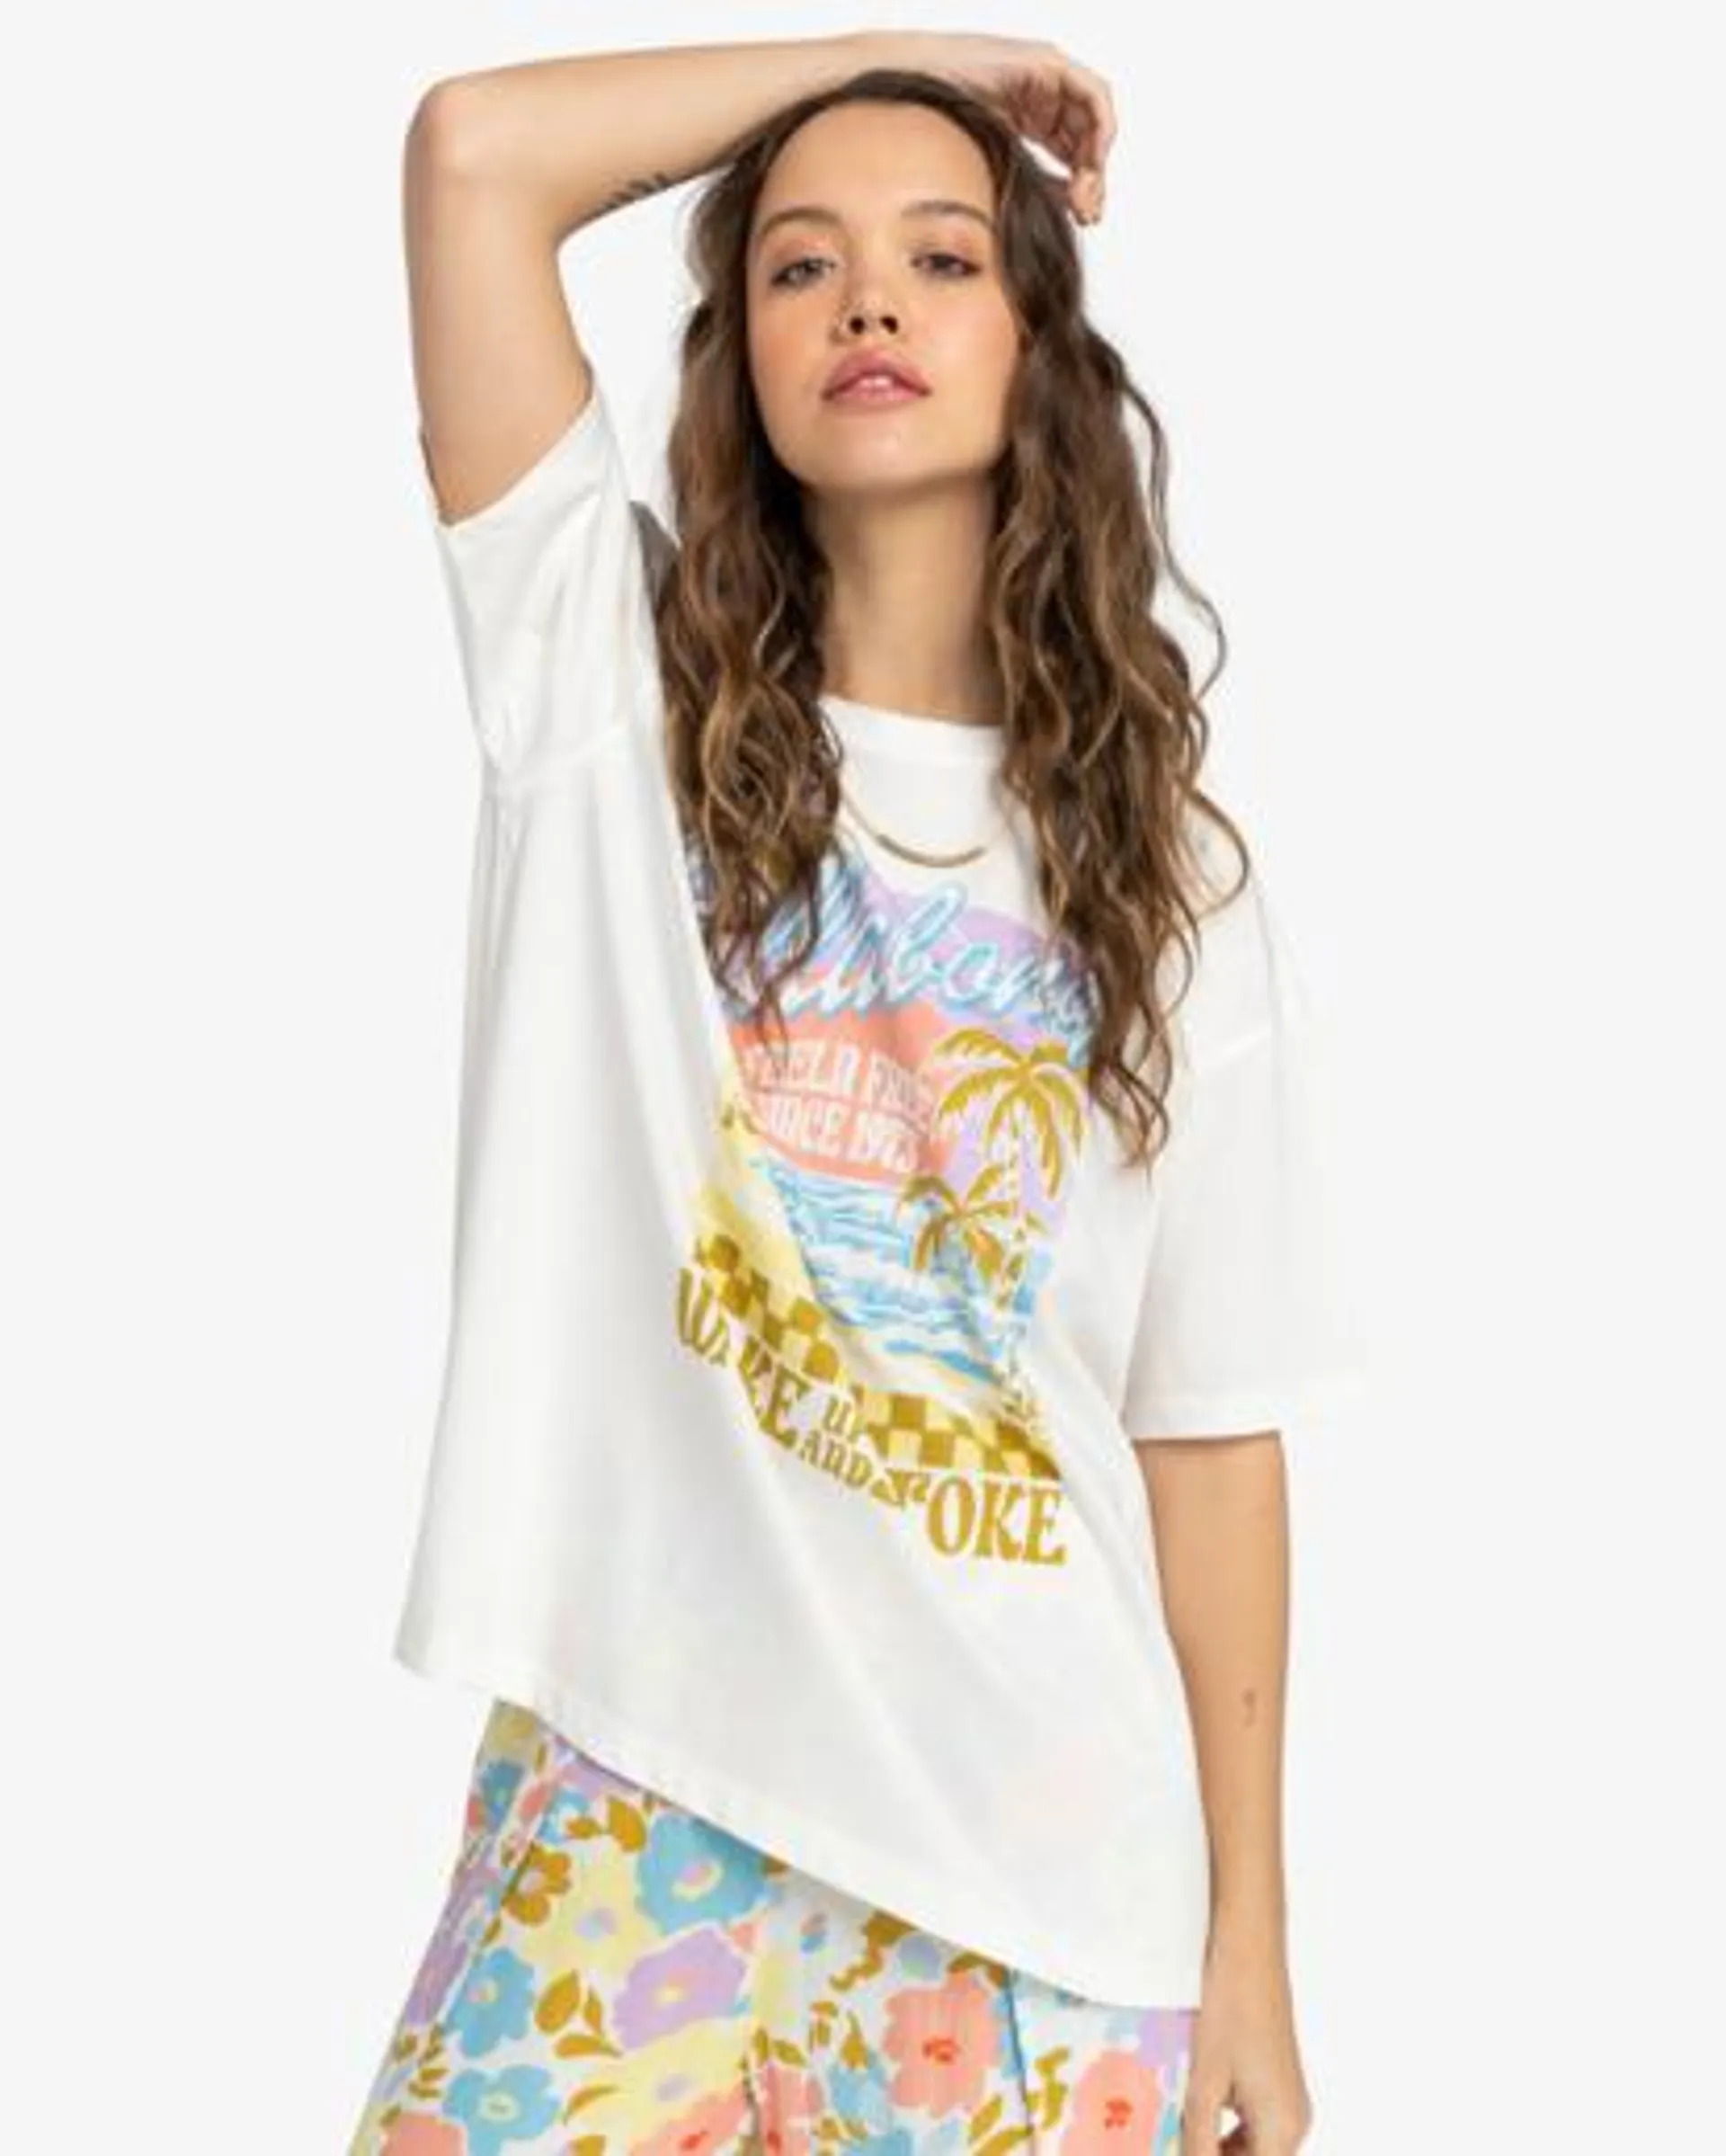 Wake Up And Stoke - T-shirt pour Femme